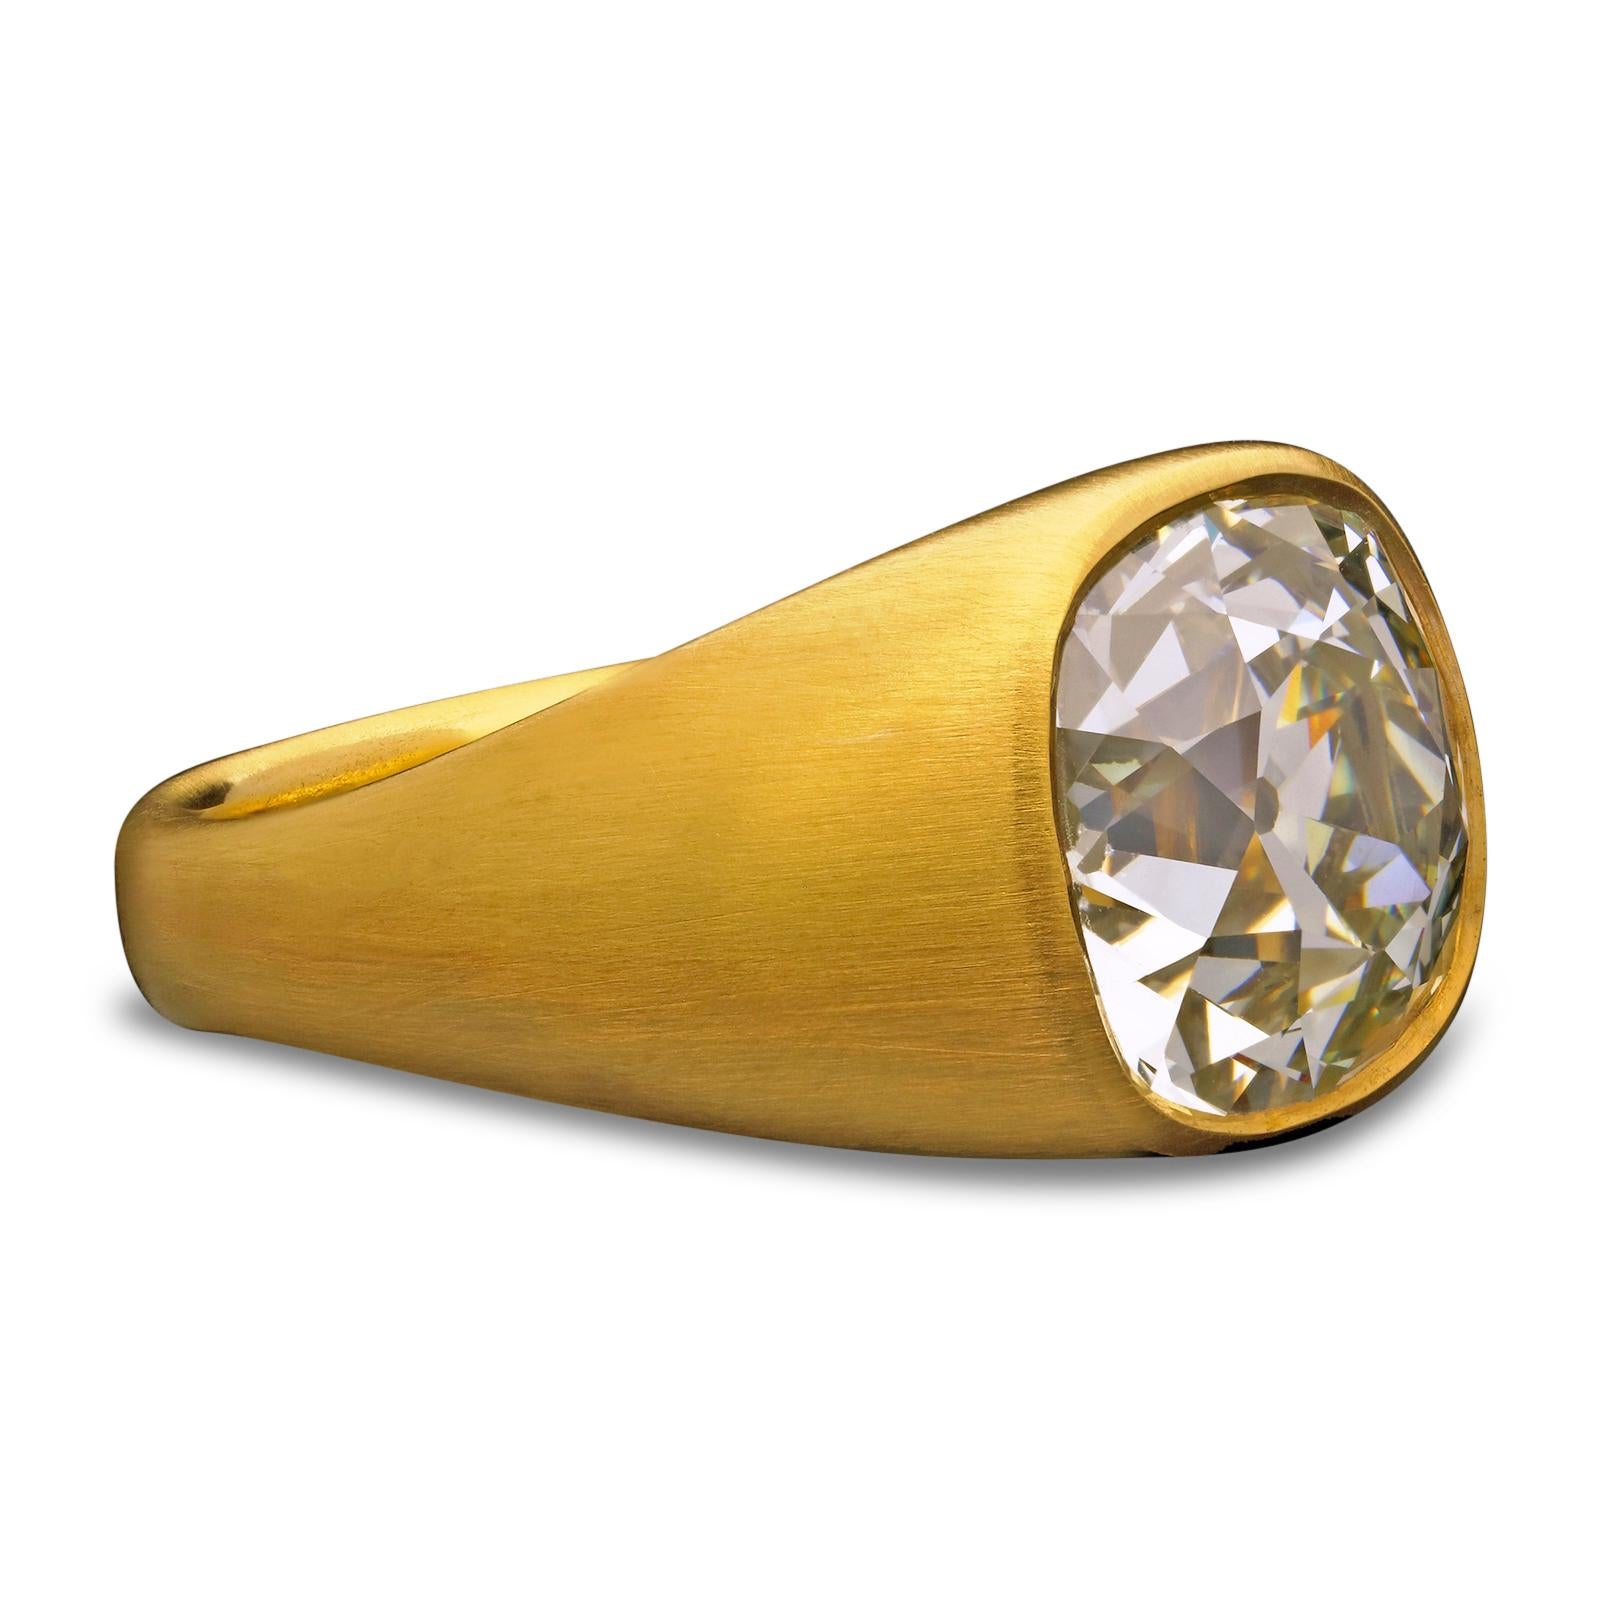 A stunning yellow gold and old-cut cushion shaped diamond gypsy-set ring by Hancocks, set flush to the centre with a wonderfully bright and lively old mine brilliant cut diamond weighing 7.90ct within a beautifully hand-crafted mount of rich 22ct